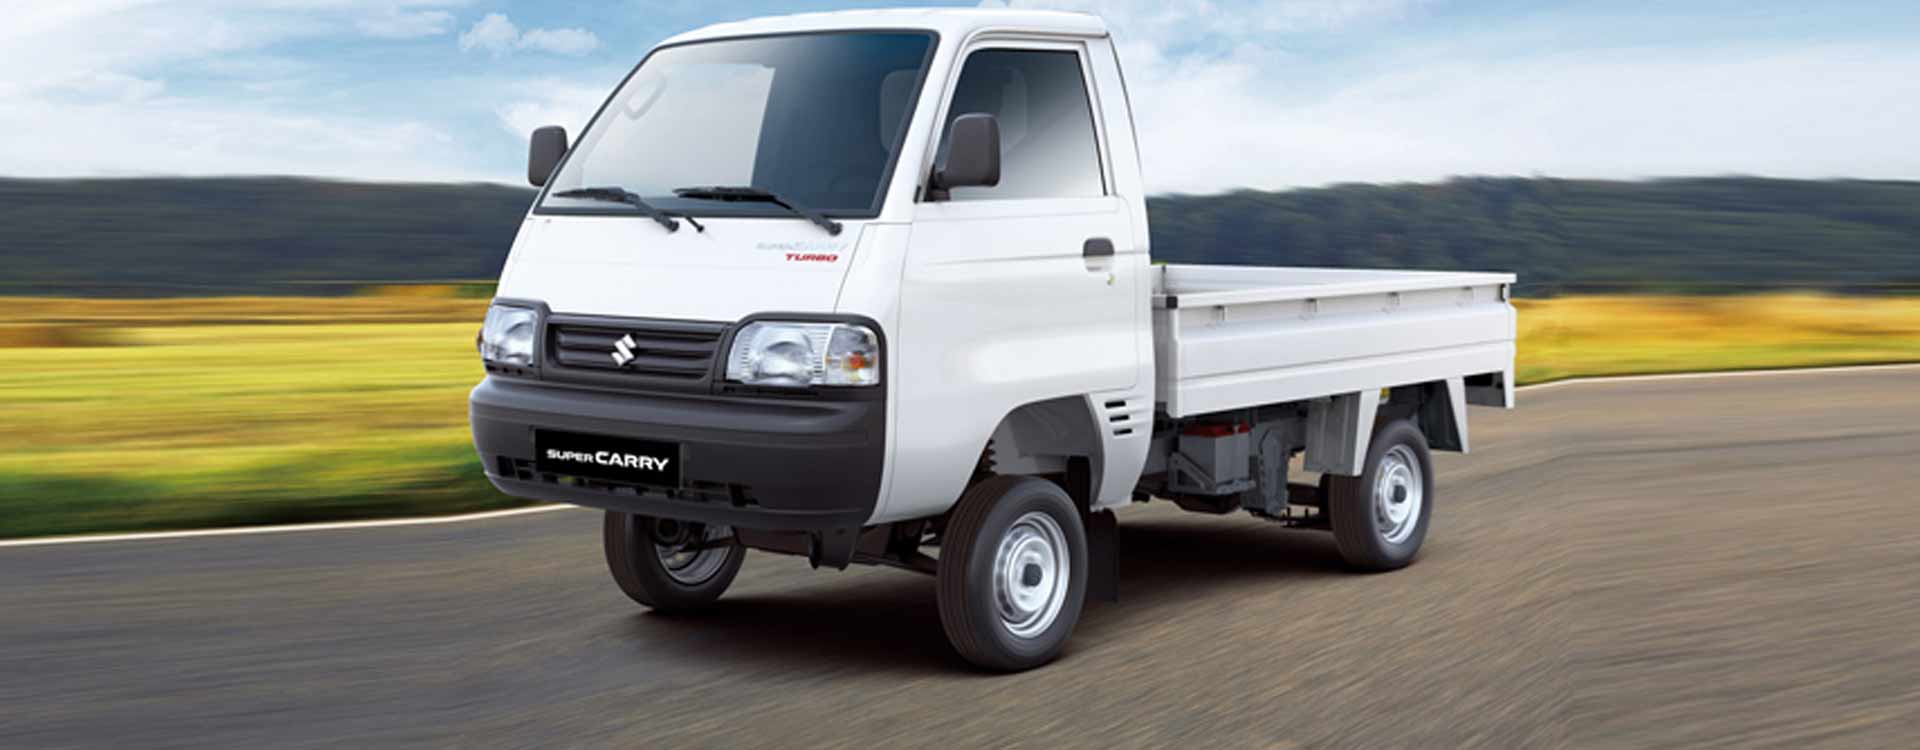 Maruti Commercial Vehicle in Chennai